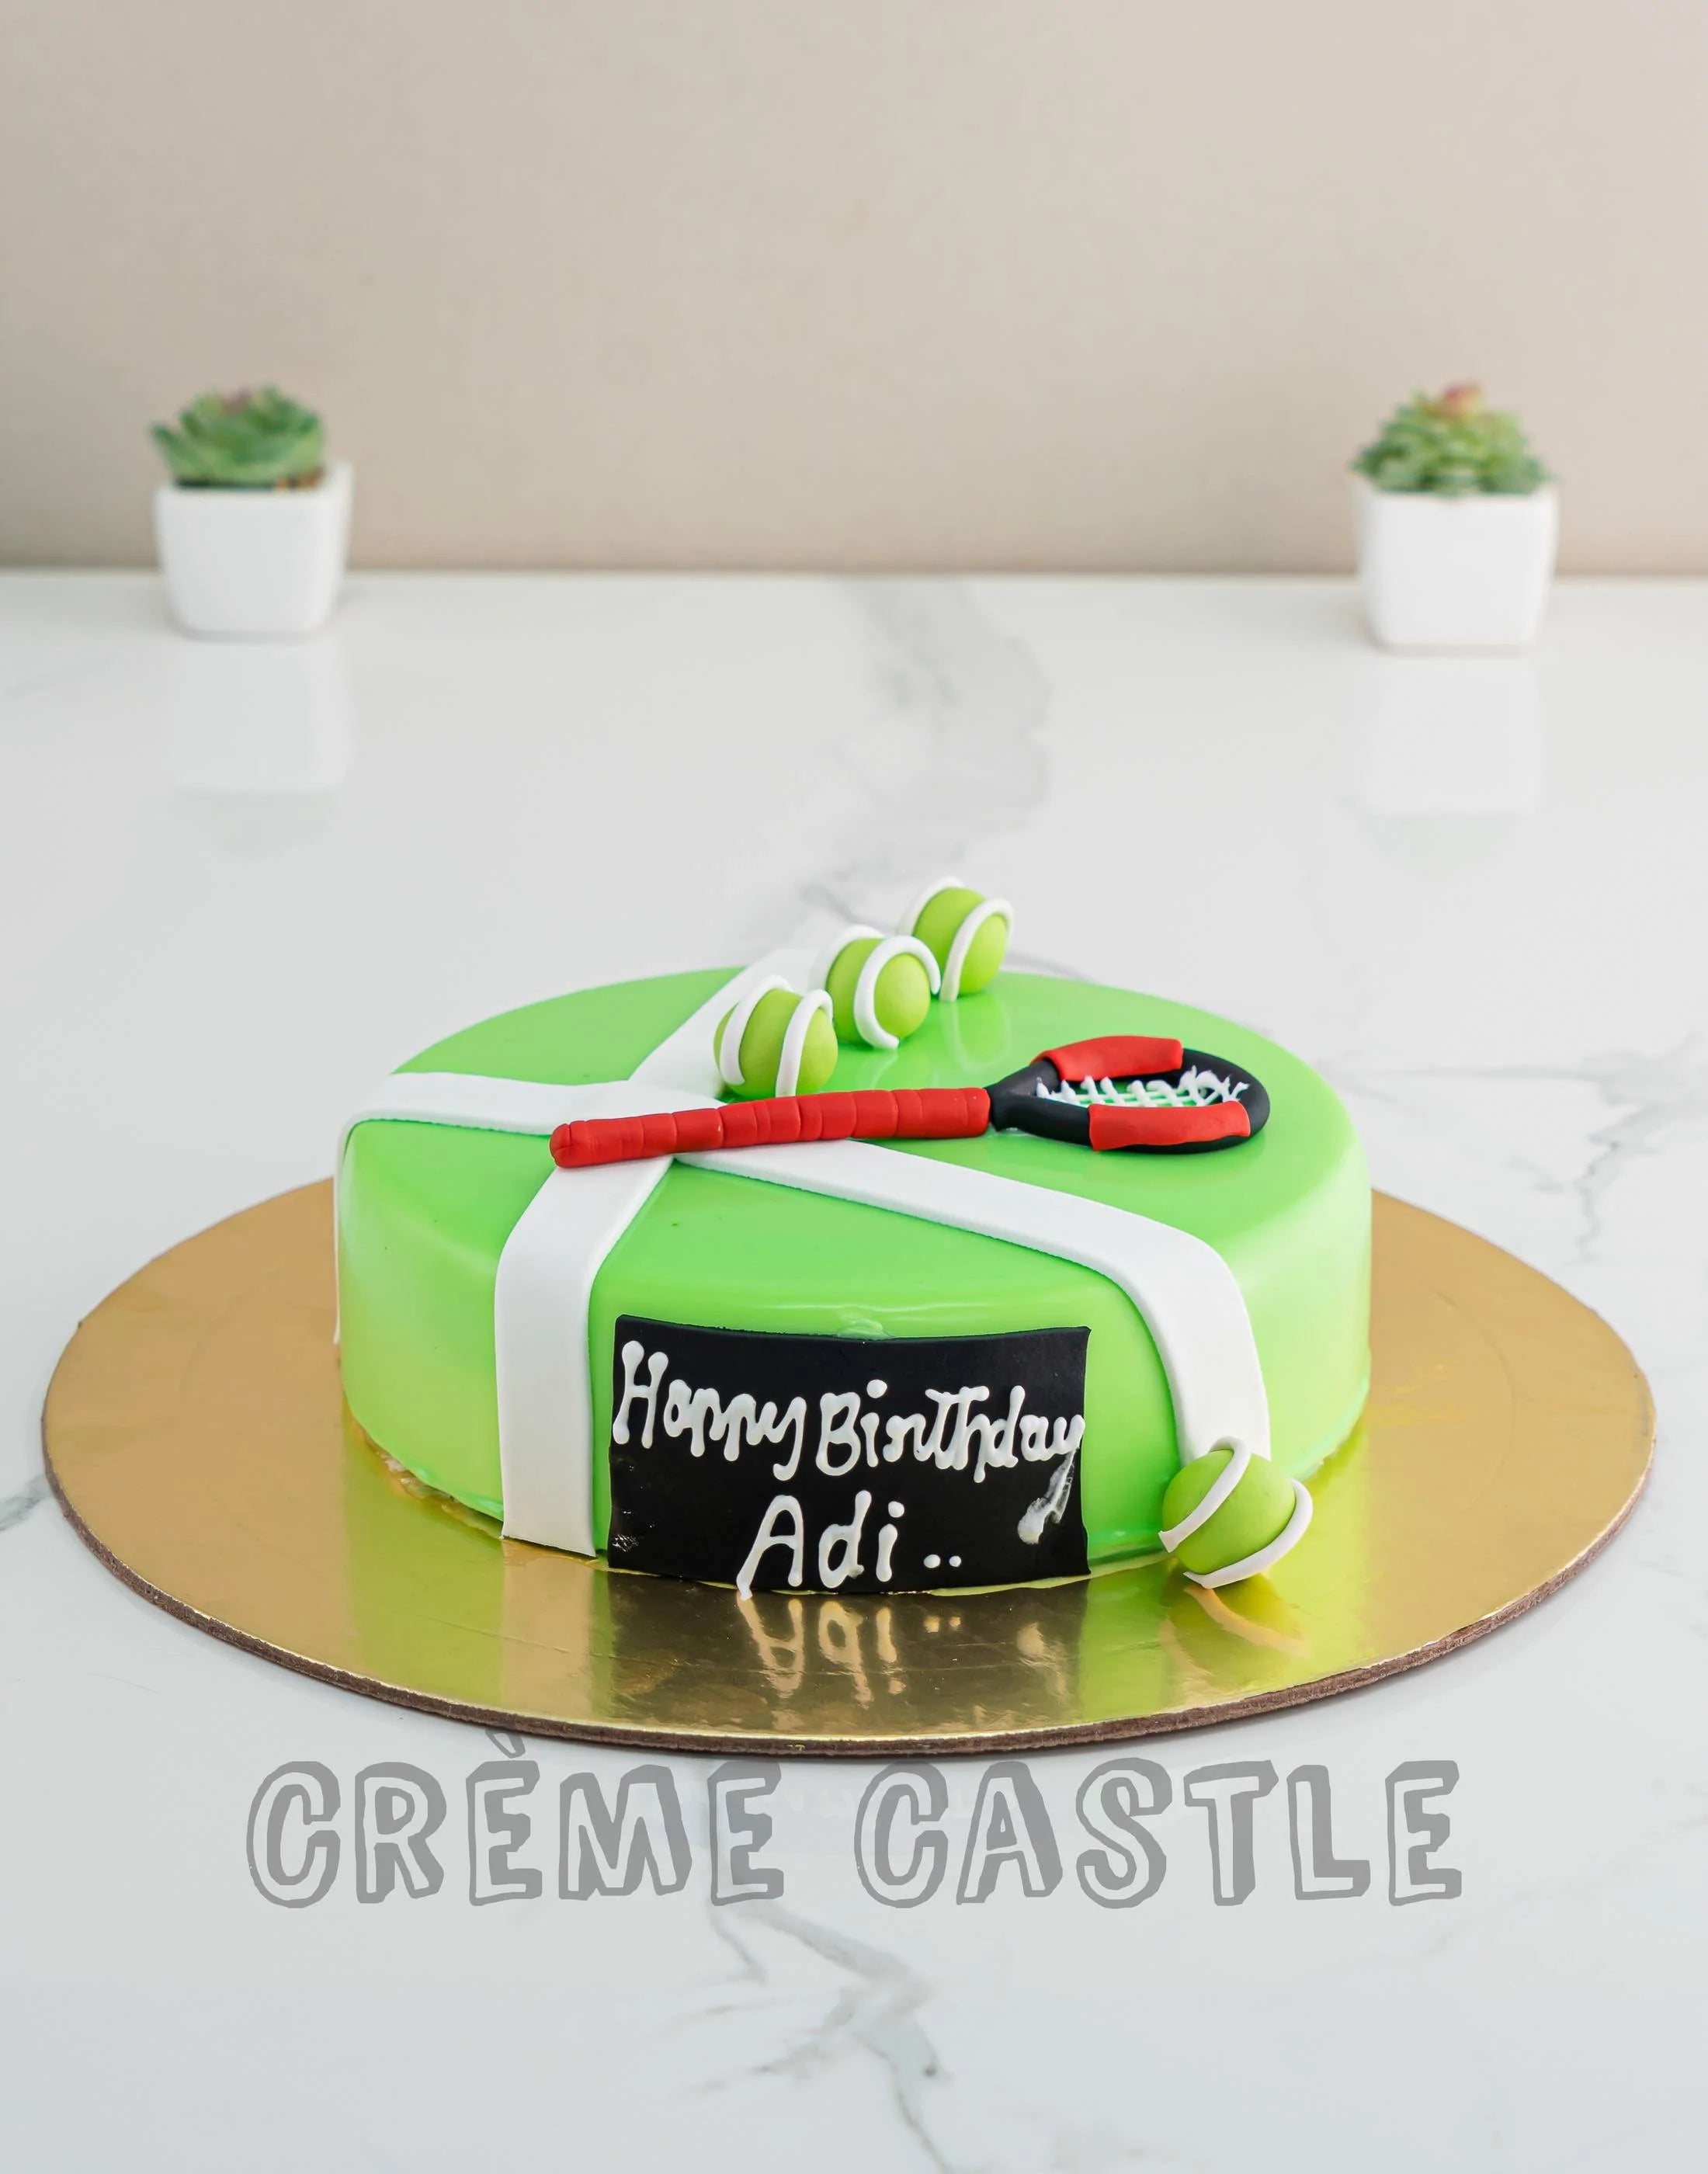 Almost Tennis Cake - The Great British Bake Off | The Great British Bake Off